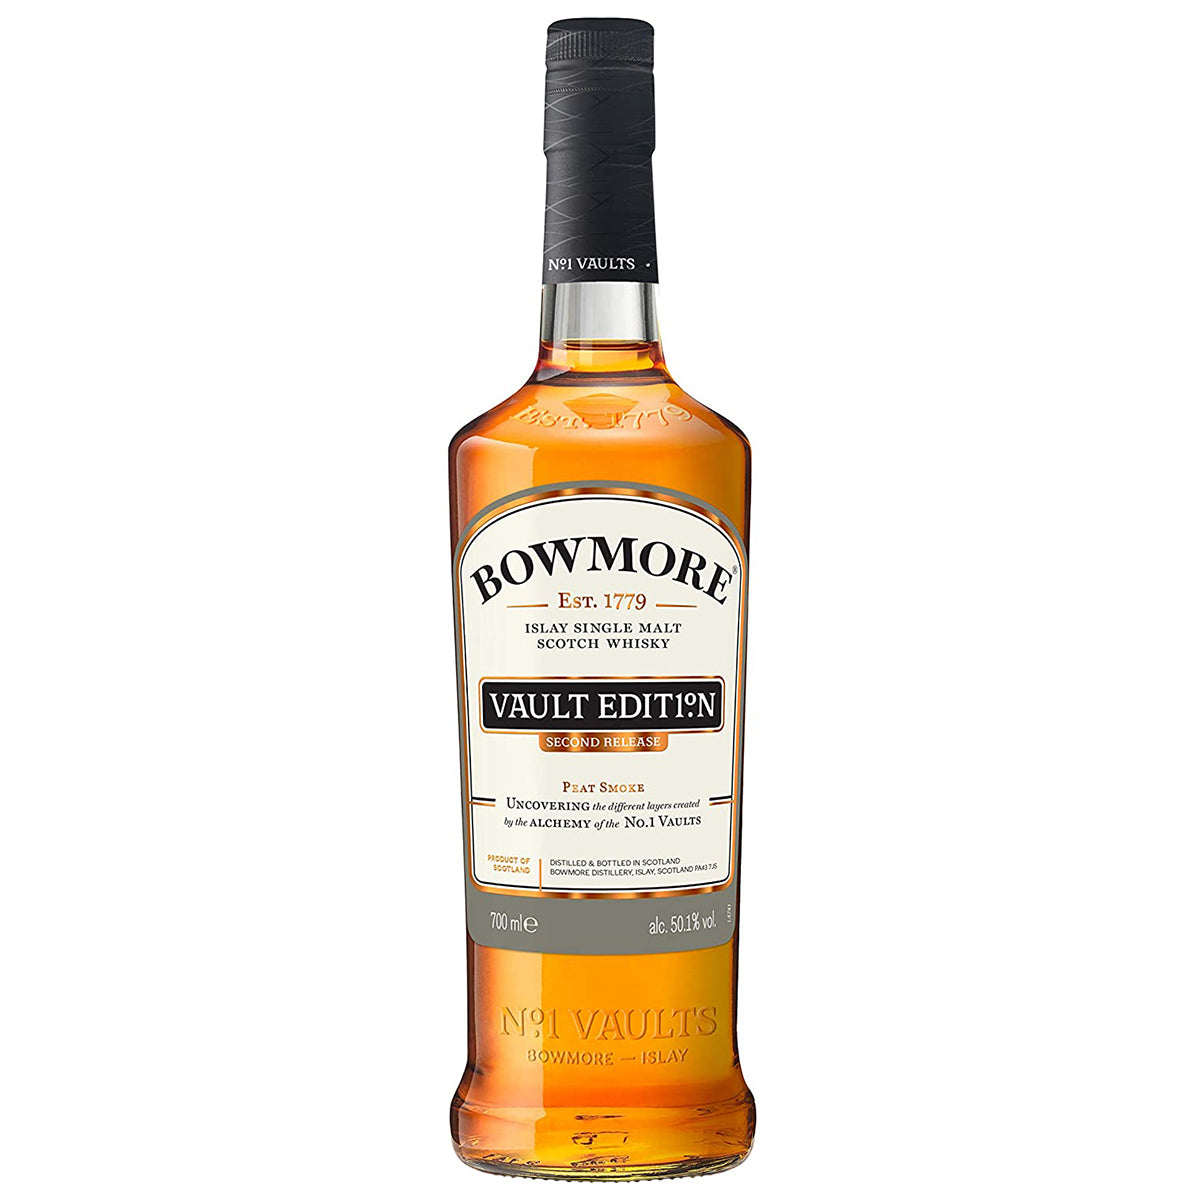 BOWMORE　vault edition 2nd